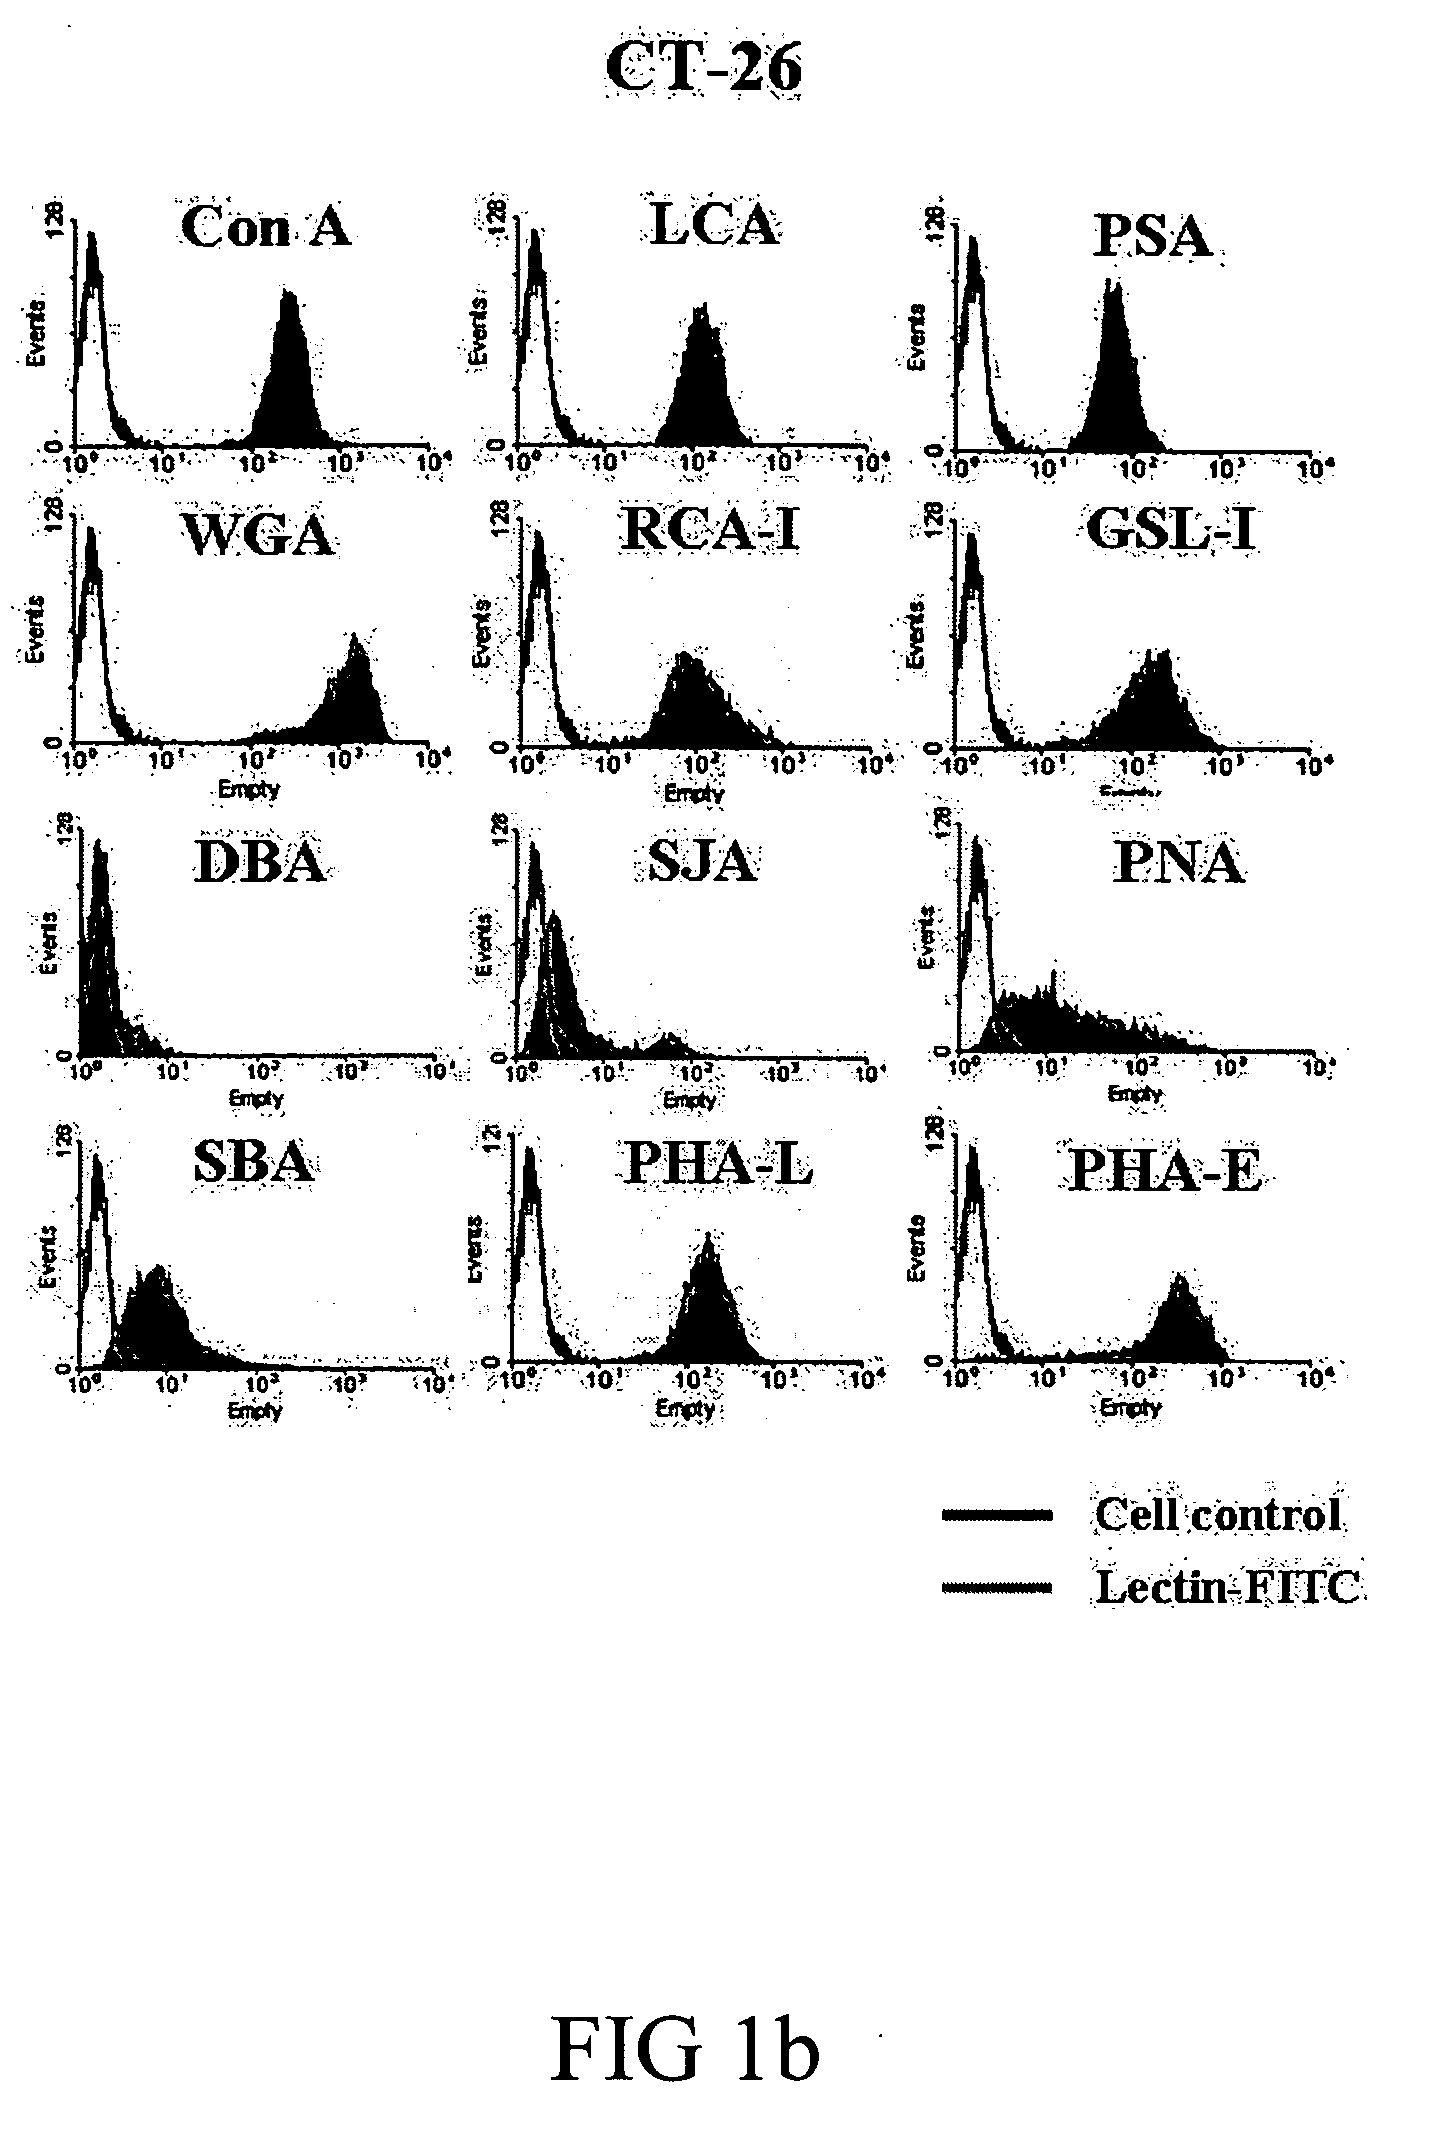 Method for treating tumor and/or preventing tumor metastasis and relapse